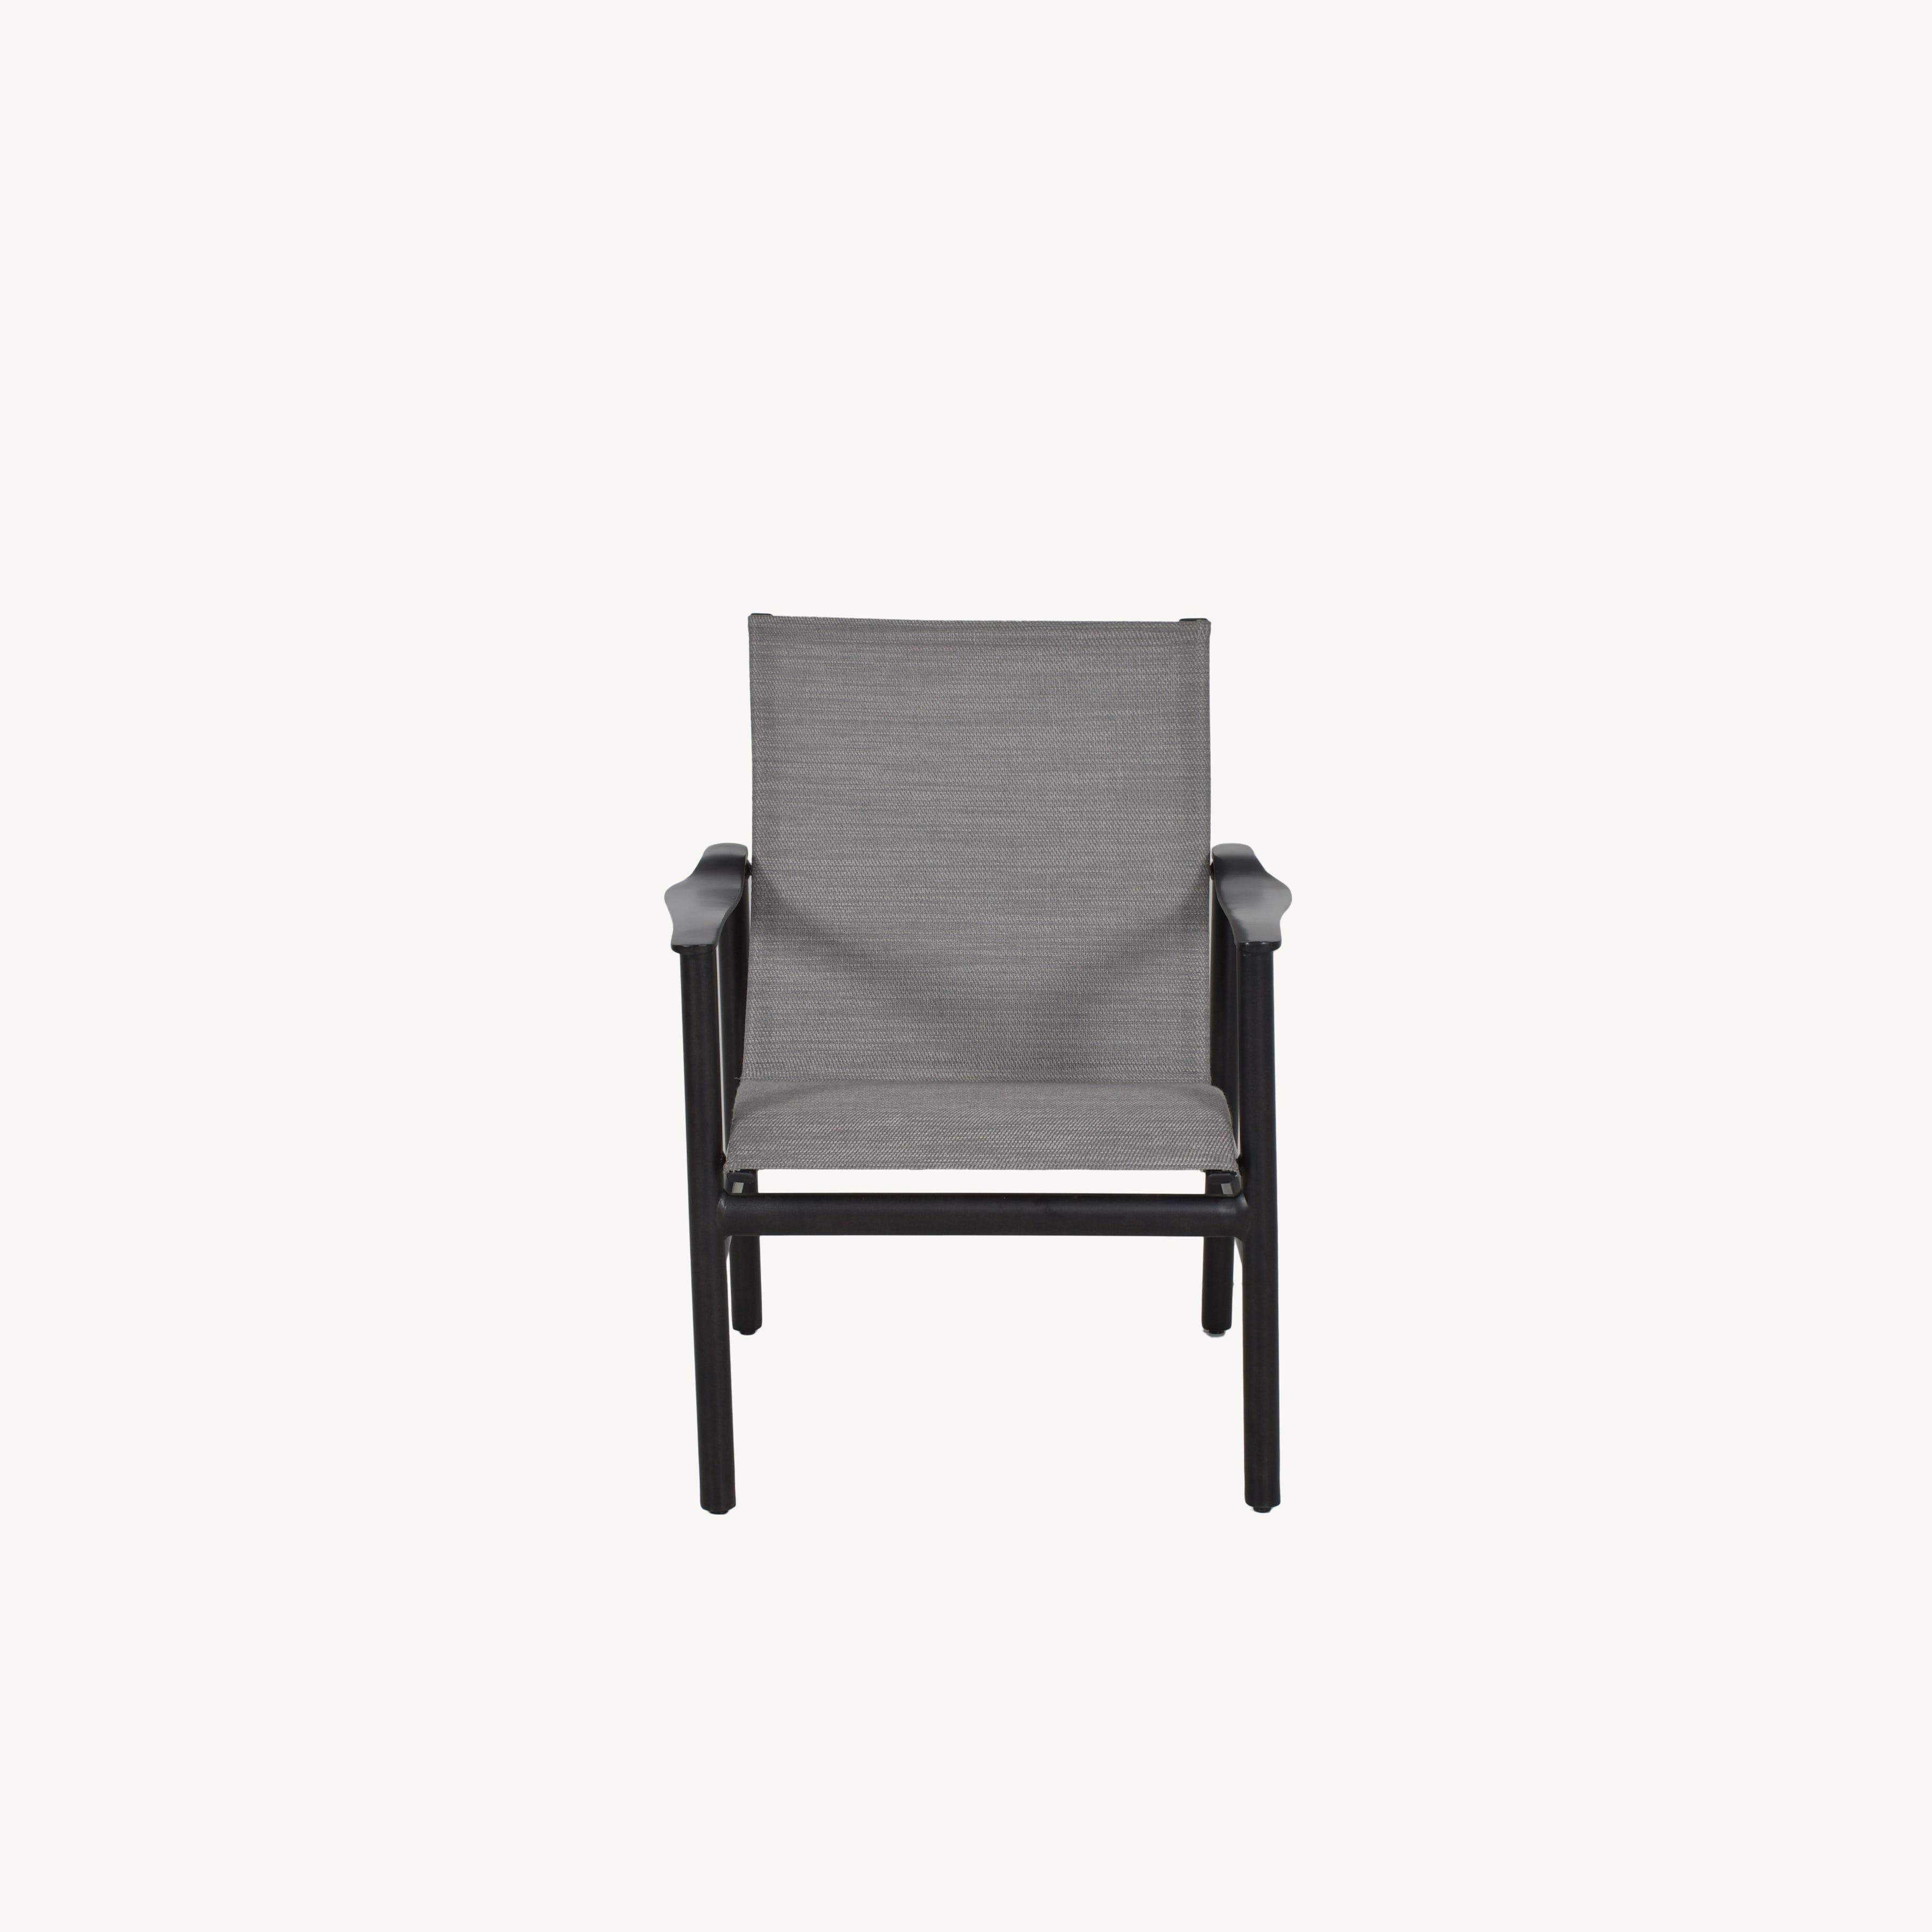 Barbados Sling Dining Chair By Castelle